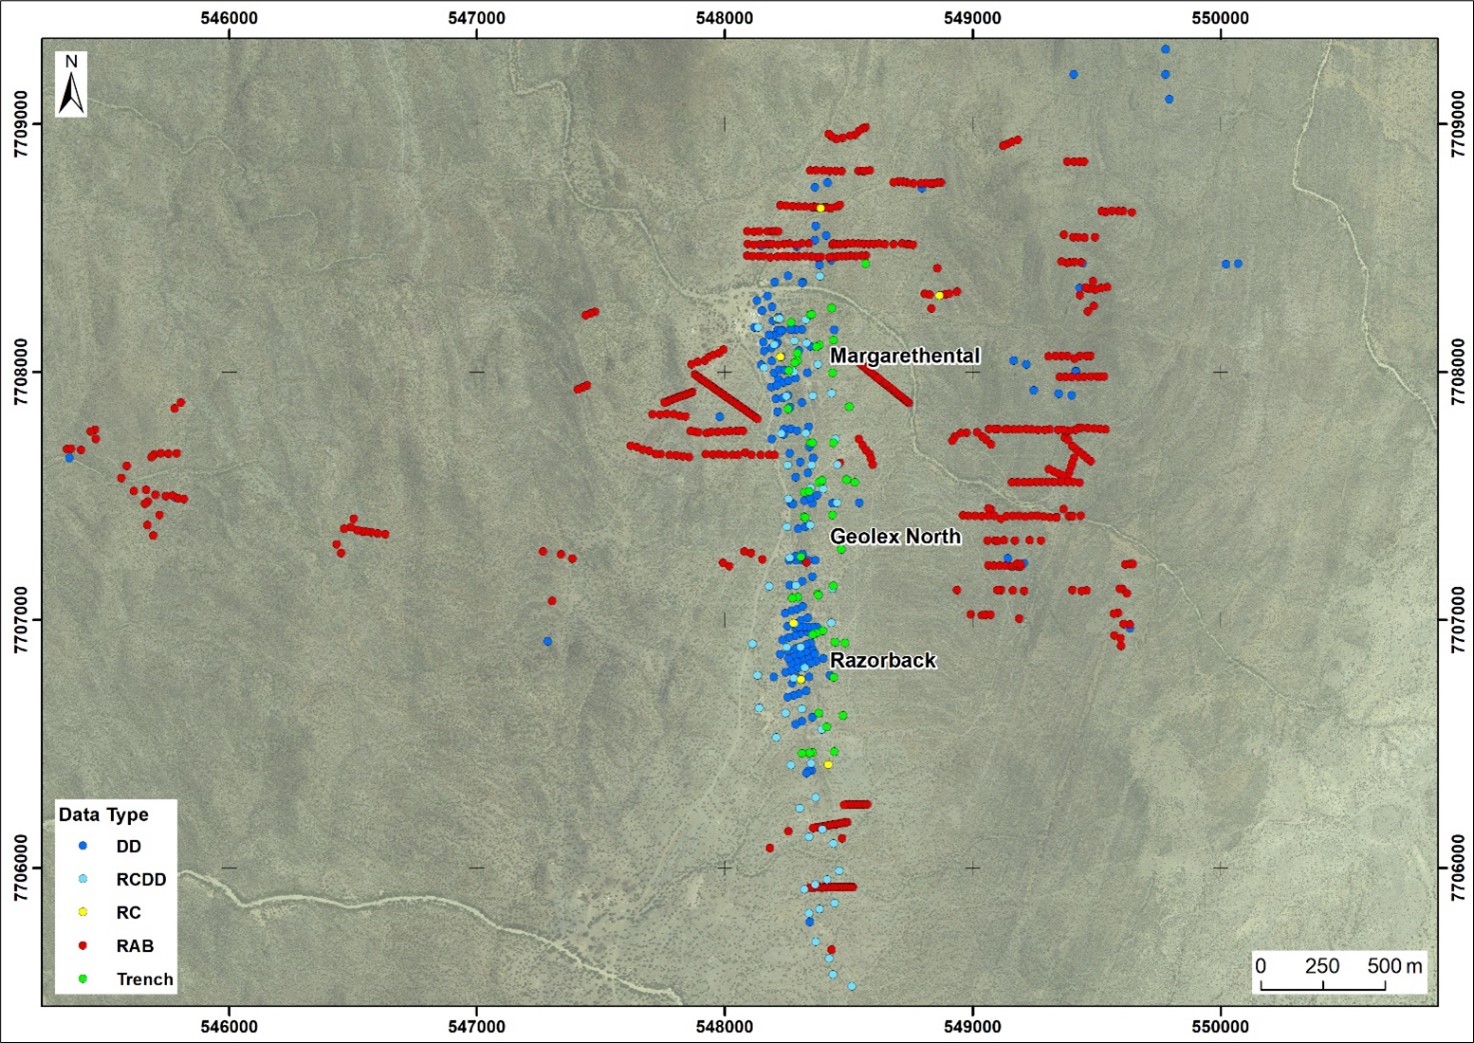 Figure 3: Plan view showing part of the drilling database indicated by collar location and type in the Ondundu area 